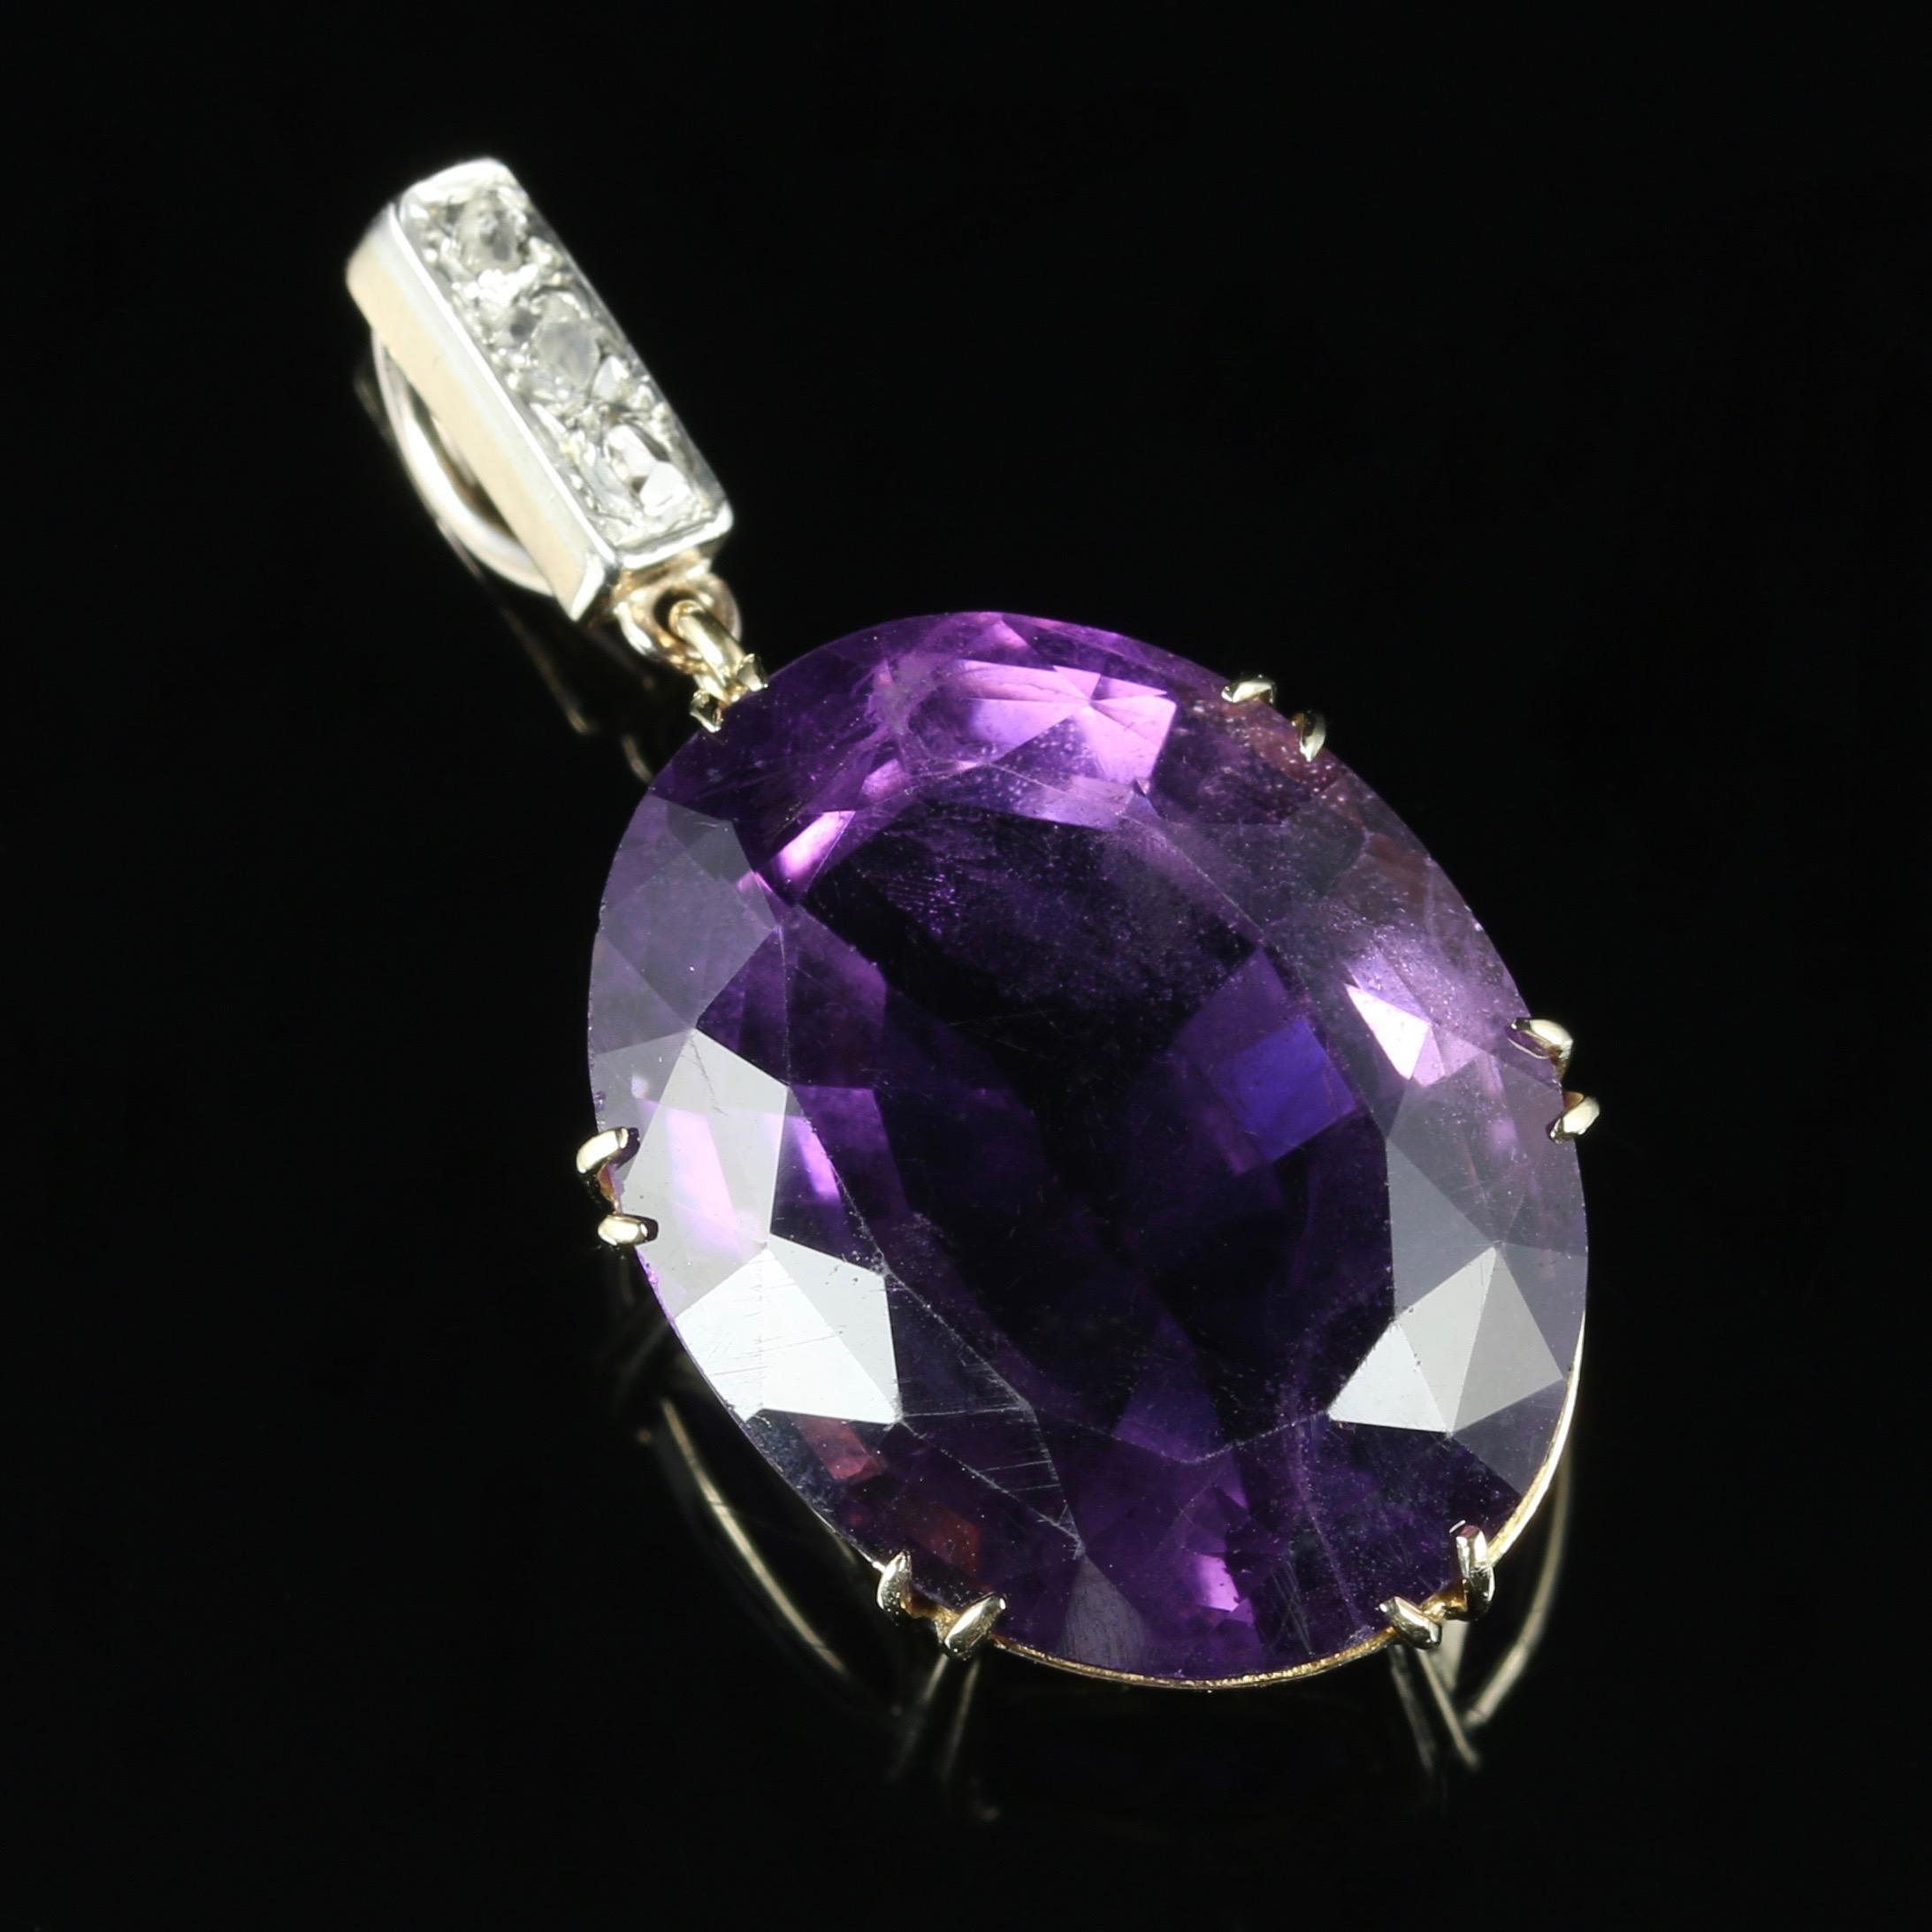 For more details please click continue reading down below...

This beautiful antique Victorian large Amethyst and trilogy Diamond pendant is Circa 1900.

Set in a 9ct Gold gallery with stunning workmanship.

The lovely large Amethyst is over 20cts